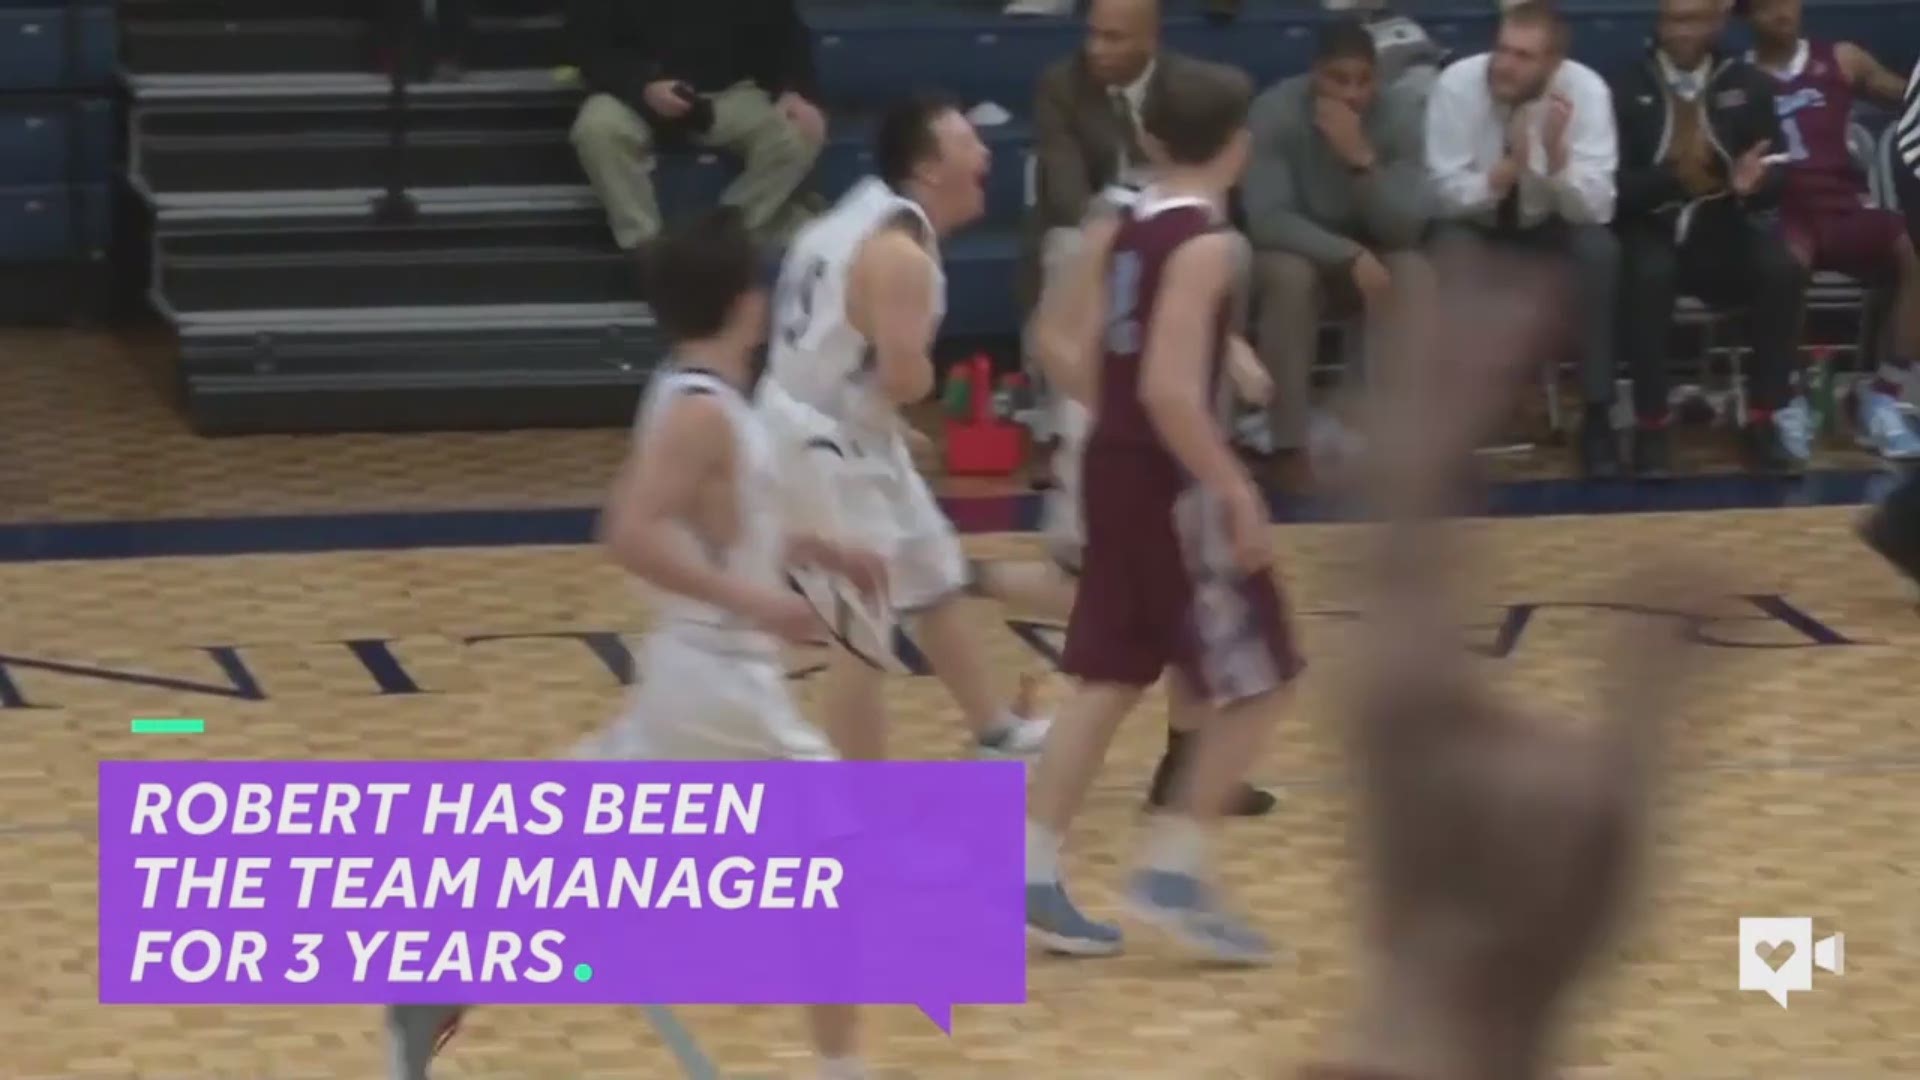 Robert Lewis has been his high school basketball team's manager for the past three years. On senior night, he was put in the game and hit a game ending 3-pointer that had the crowd going wild.